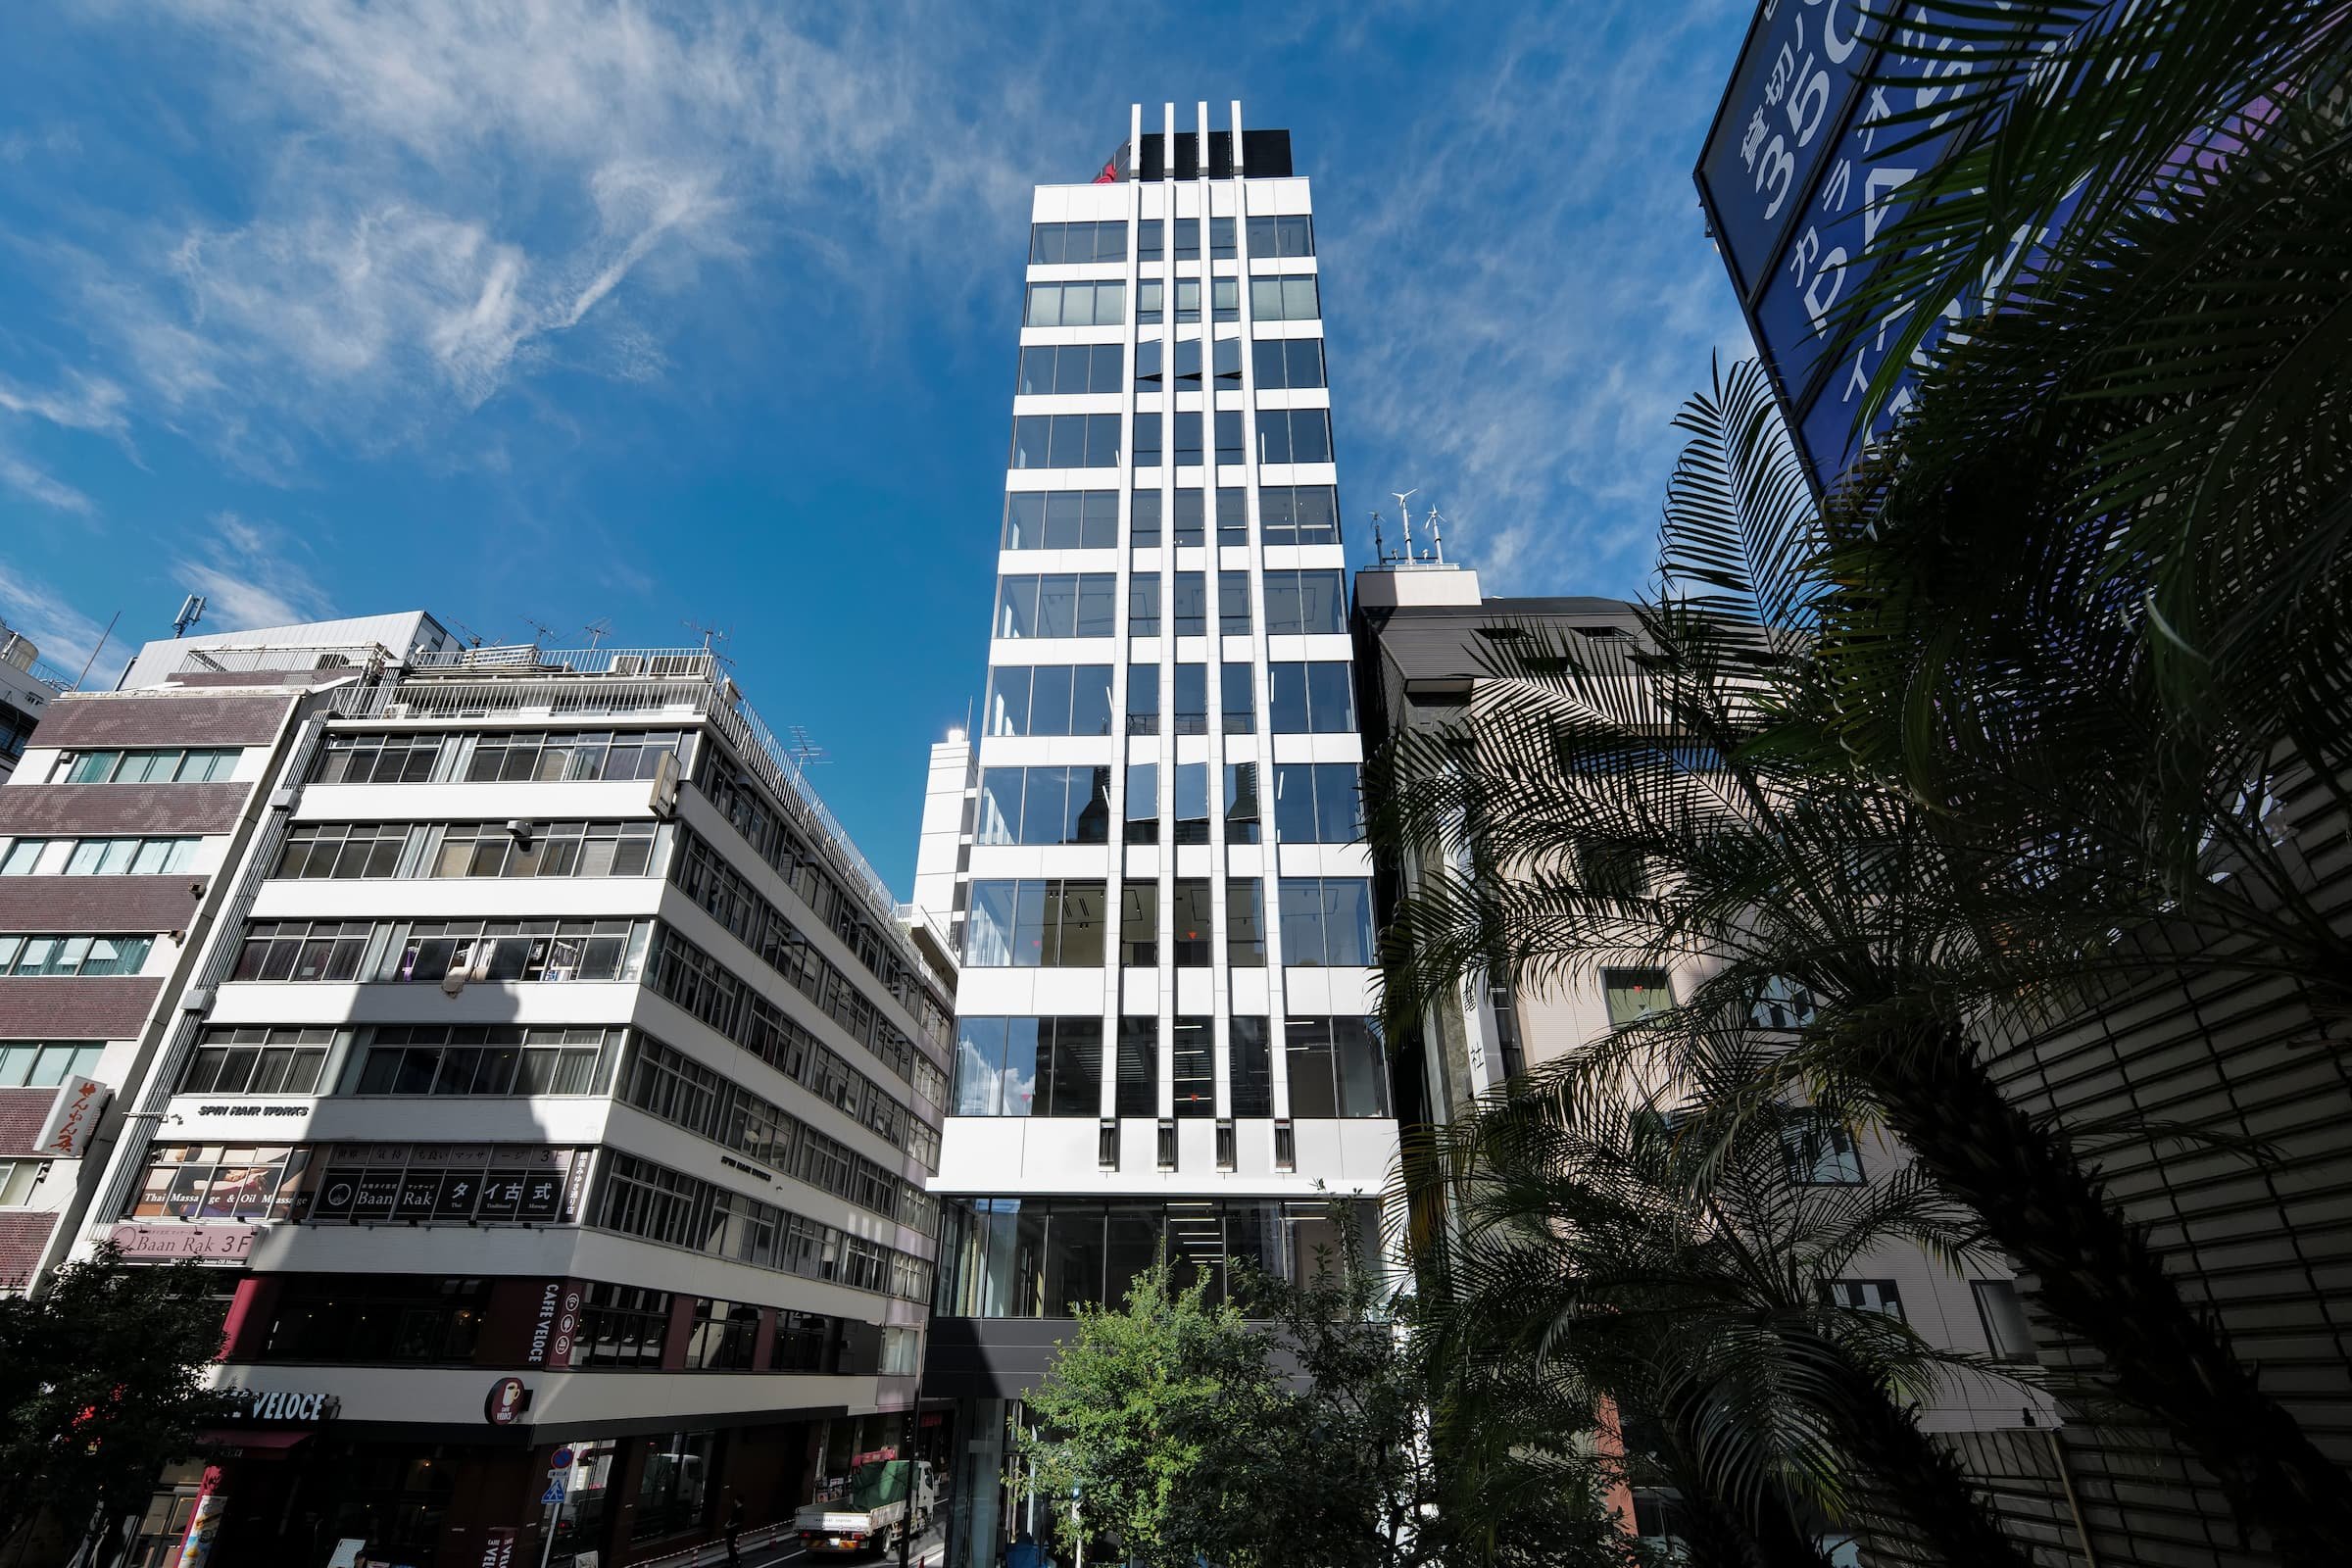 Ginza 5 12 Storey Office Commercial Building Tokyyo Seismic Control 04.jpg